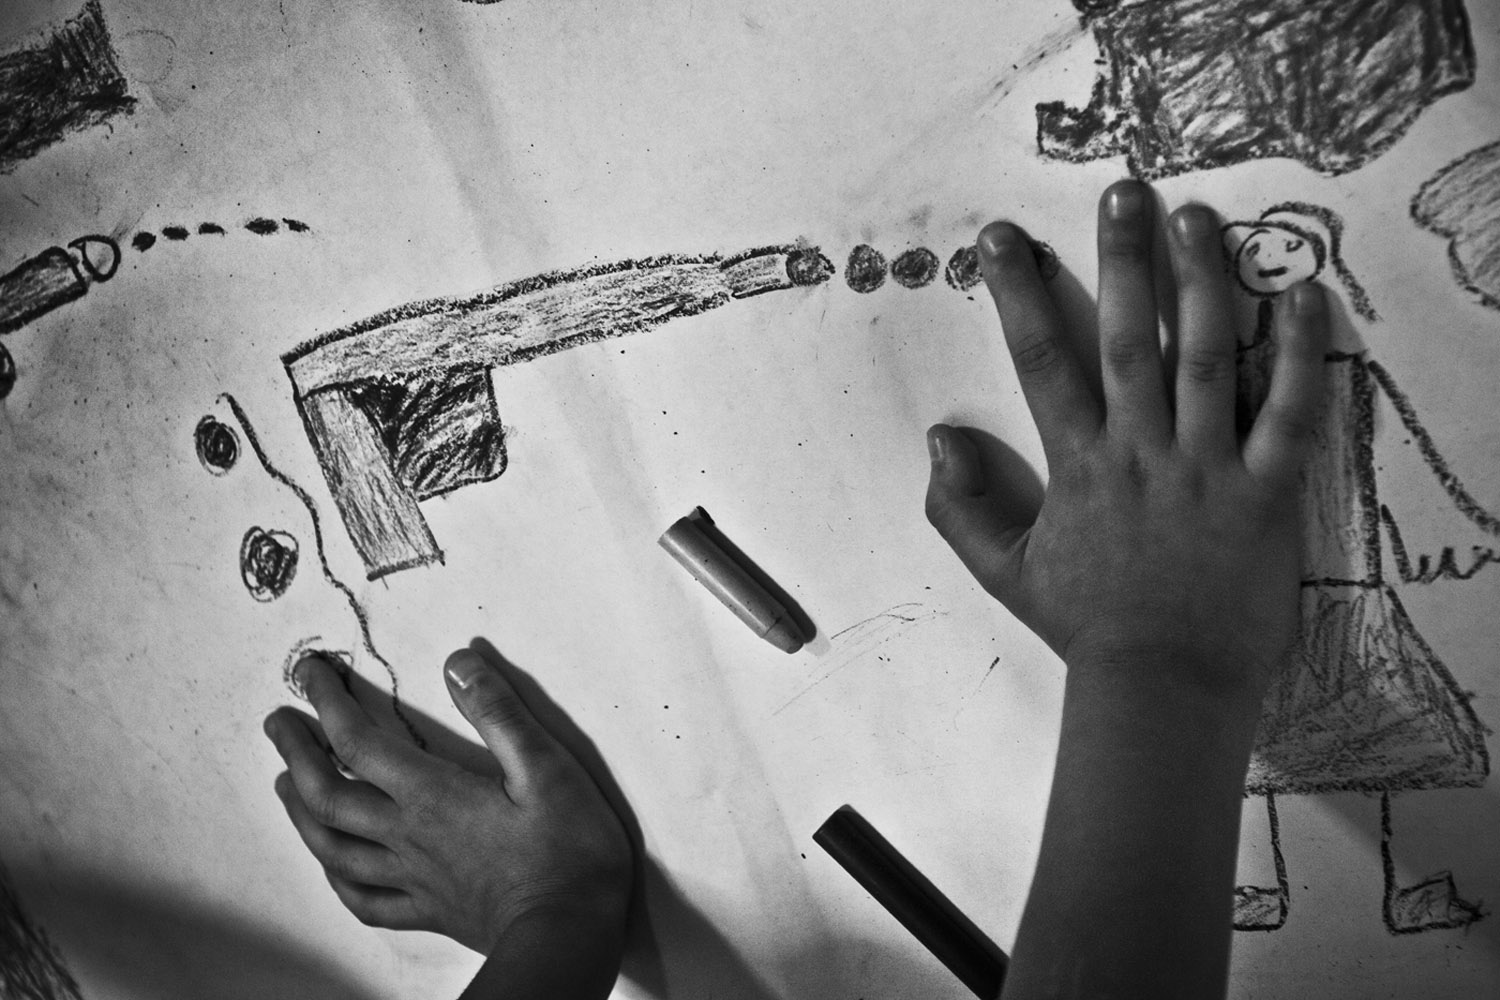 A child draws daily scenes of violence in his community. The age of entry into crime life is dropping and there are an increasing number of cases involving boys as young as 10 or 11 years old.